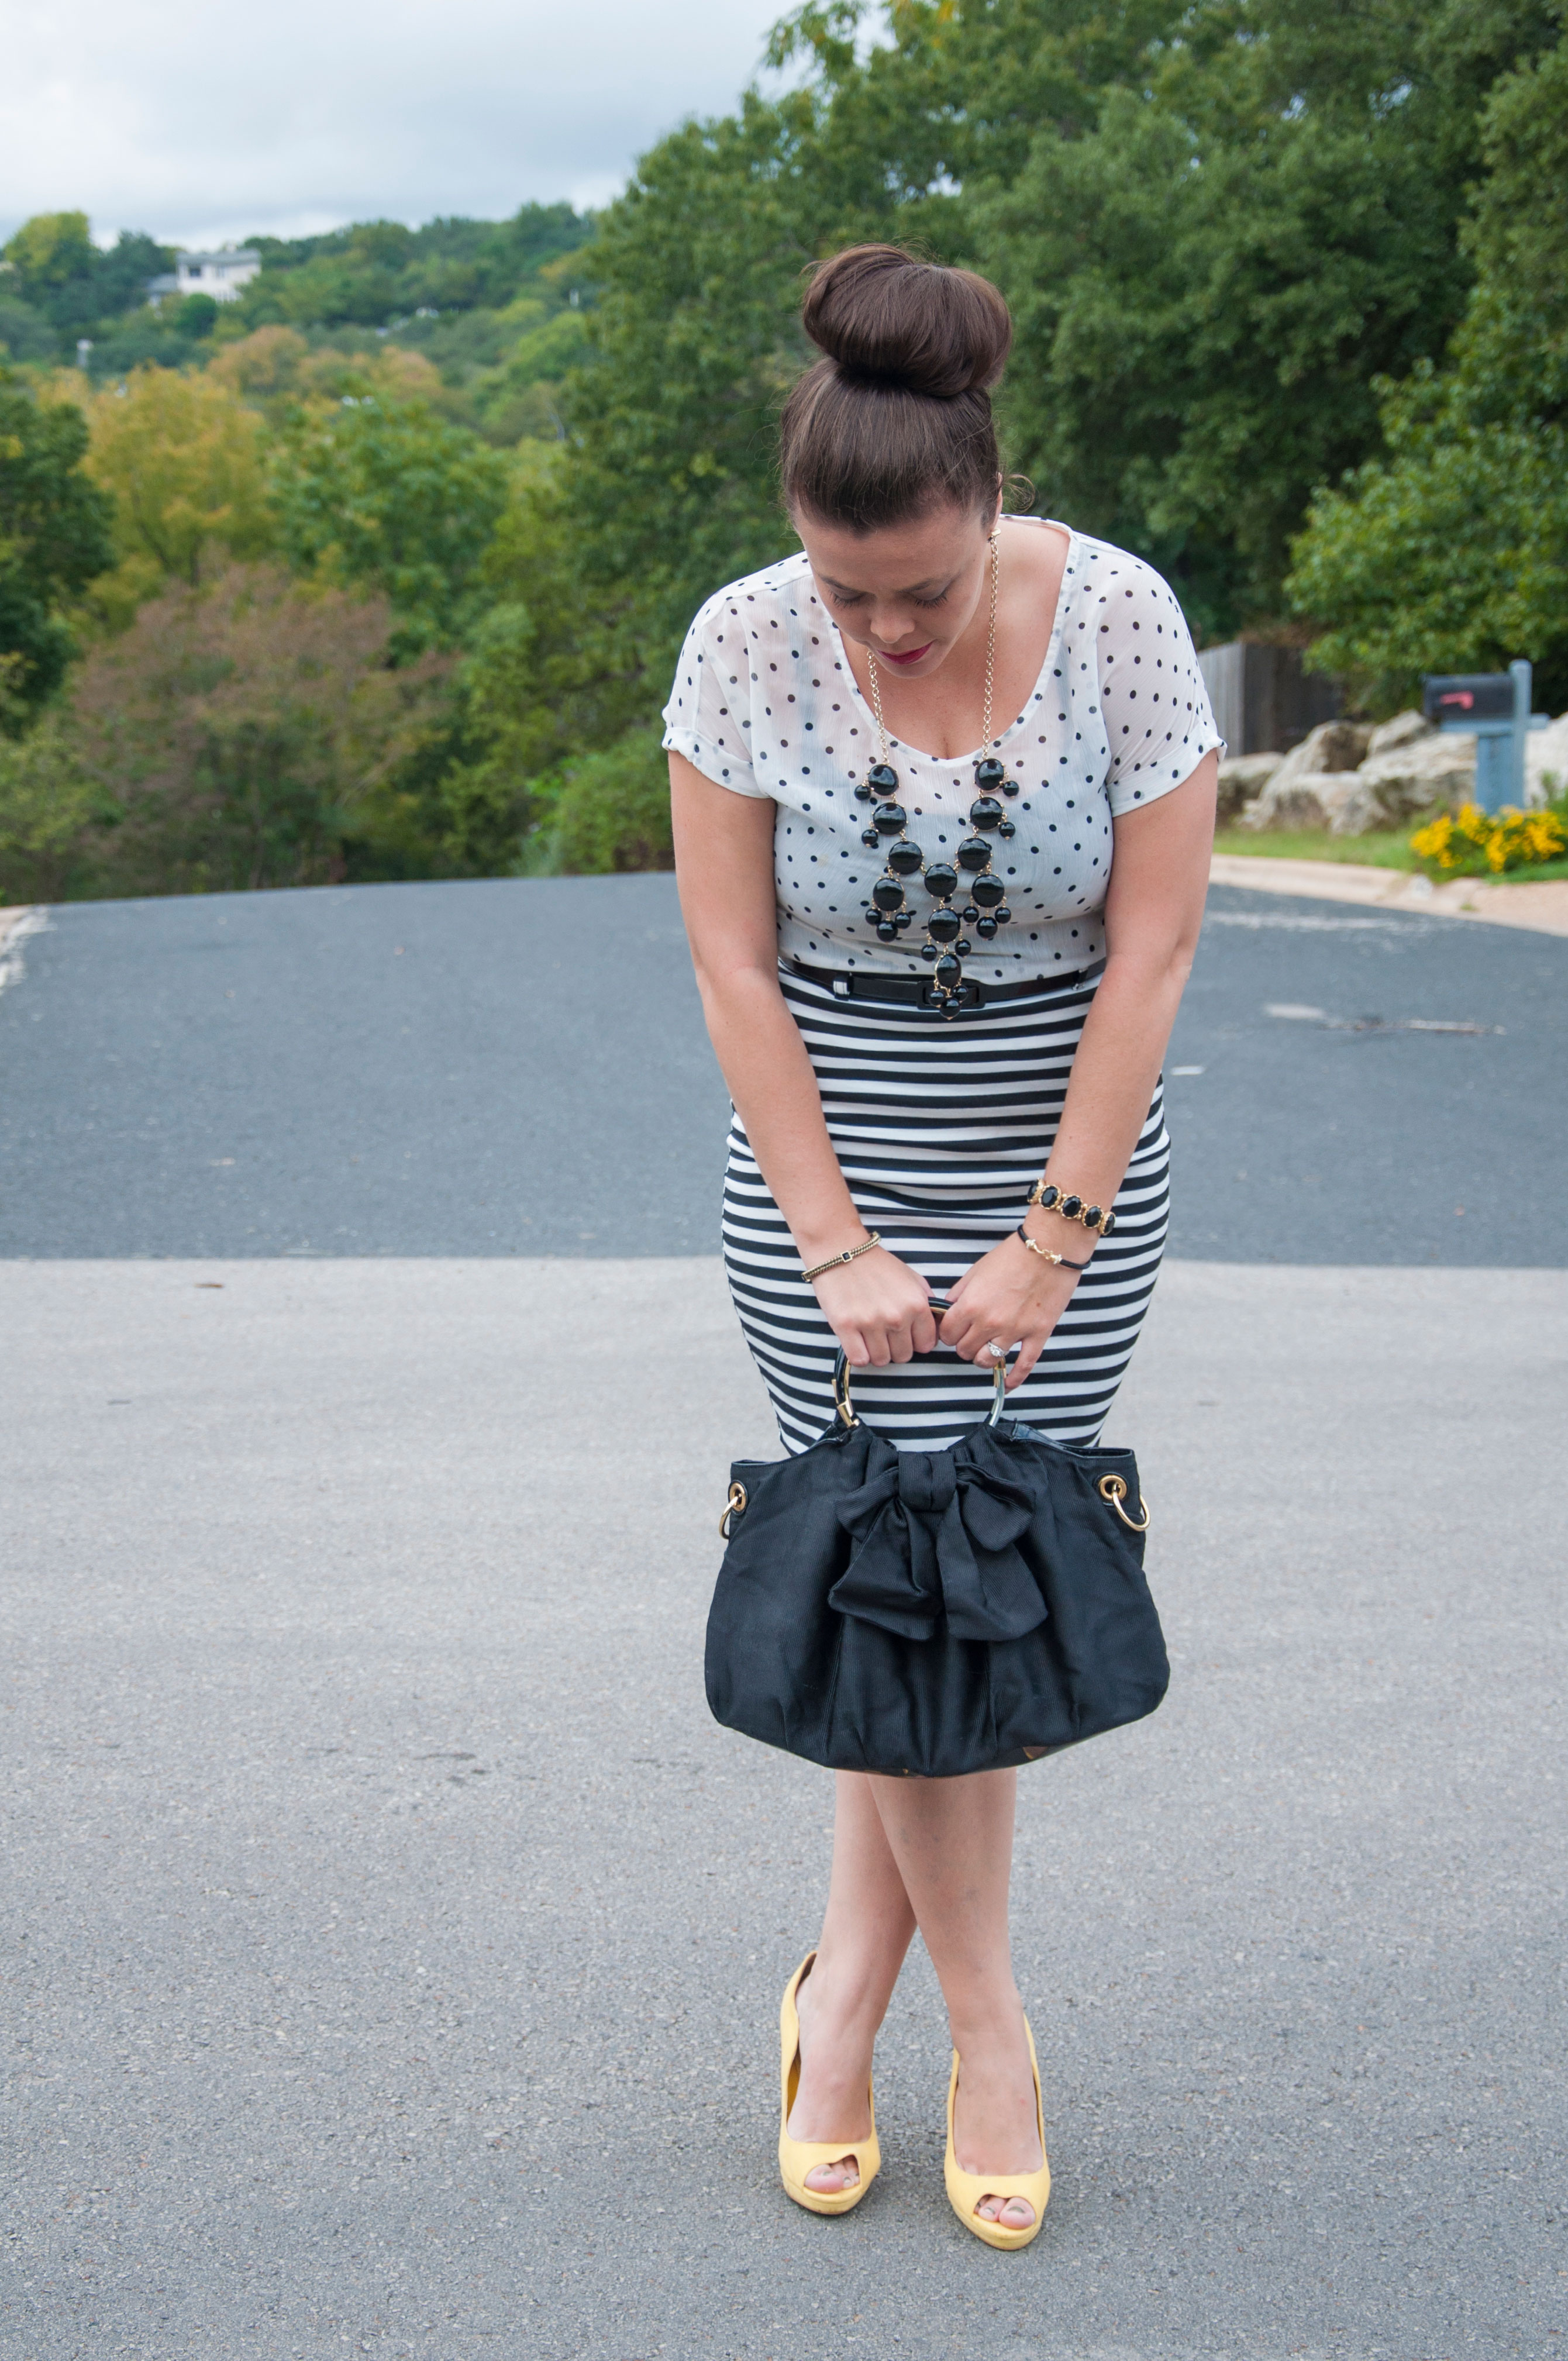 Combining a polka dot top with a white skirt